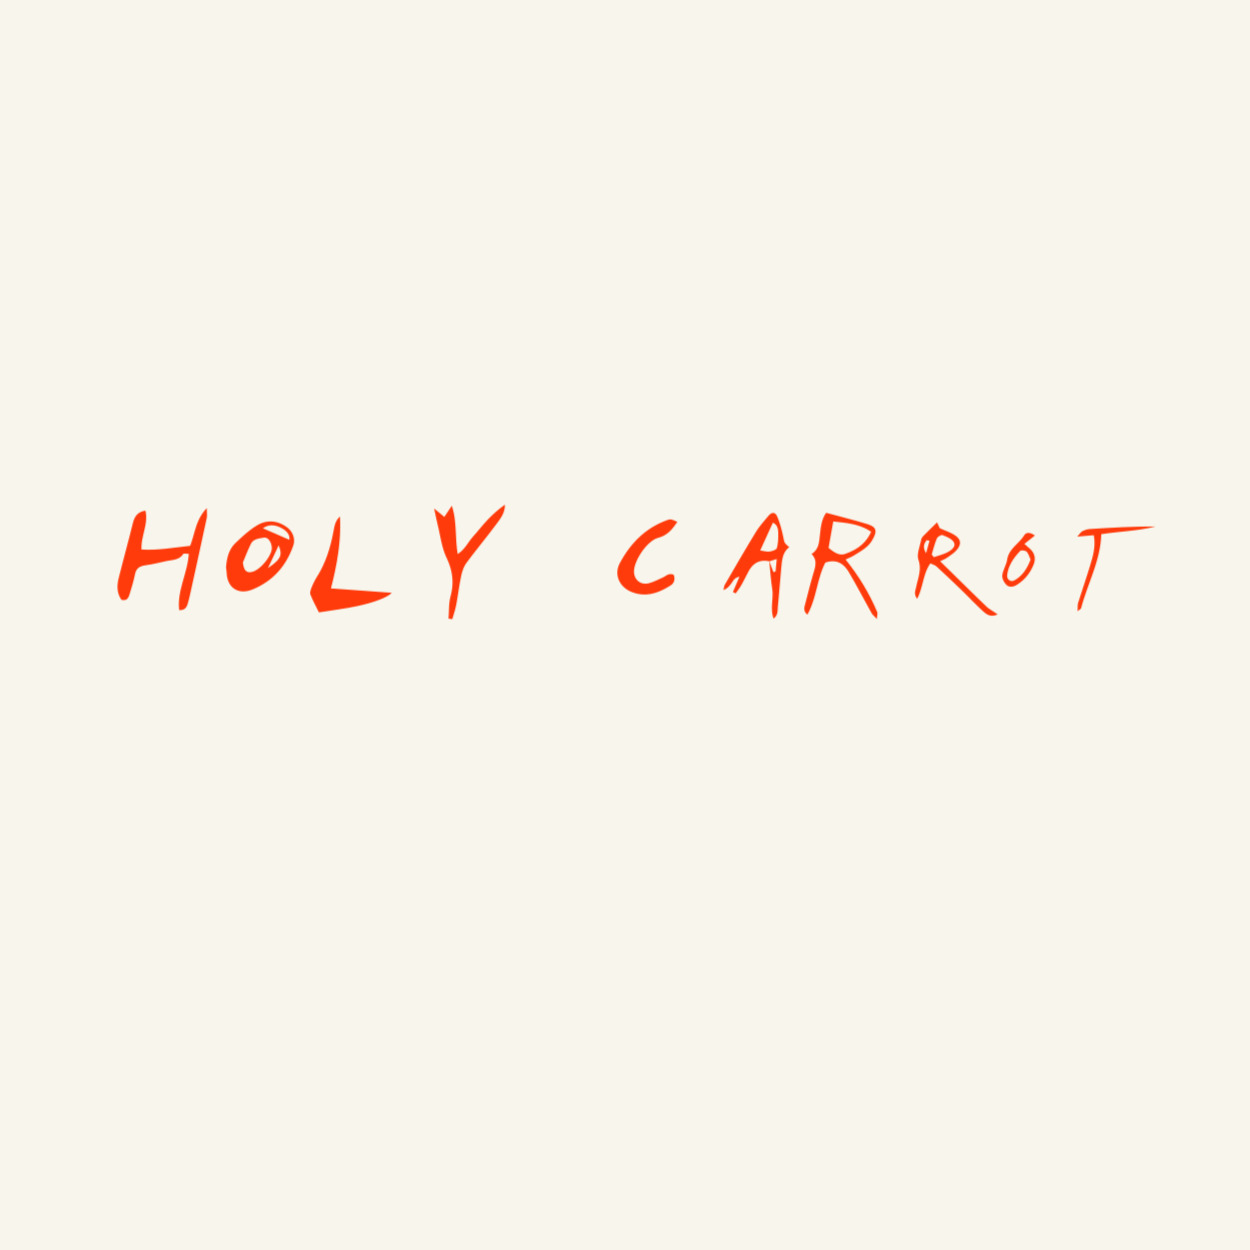 The Holy Carrot